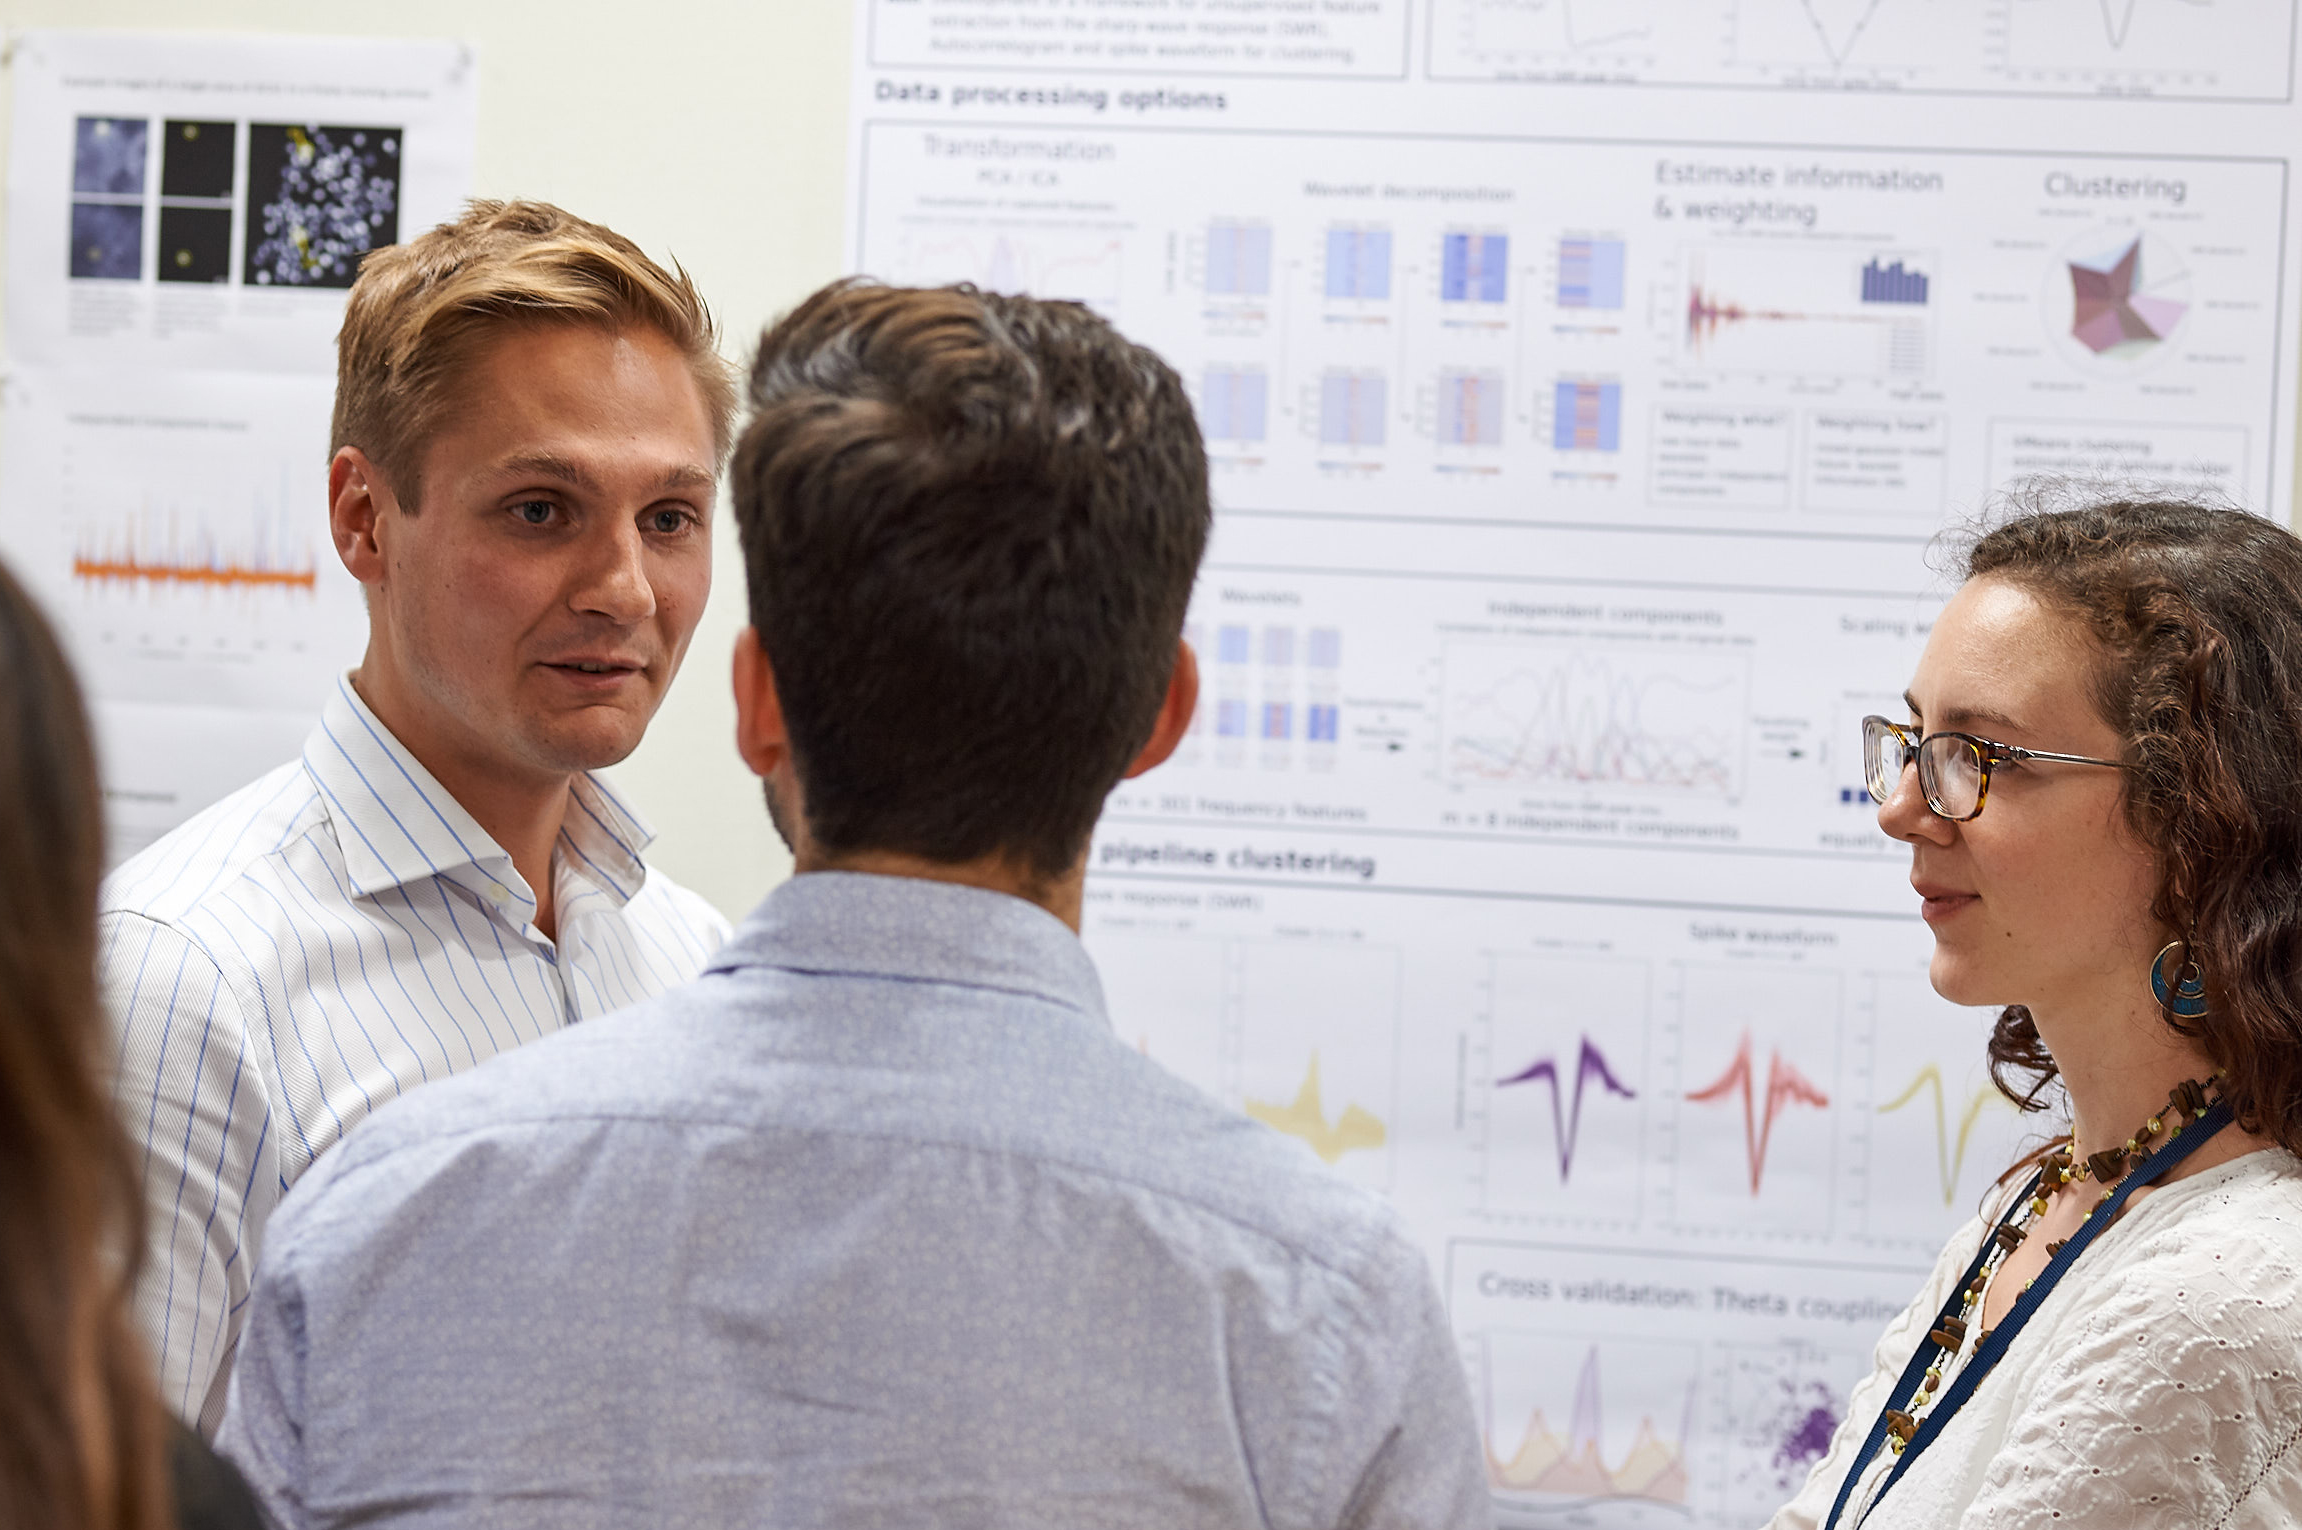 Oxford MSc in Neuroscience student Roman Rothaermel (left) discusses his summer research project undertaken at the Unit.